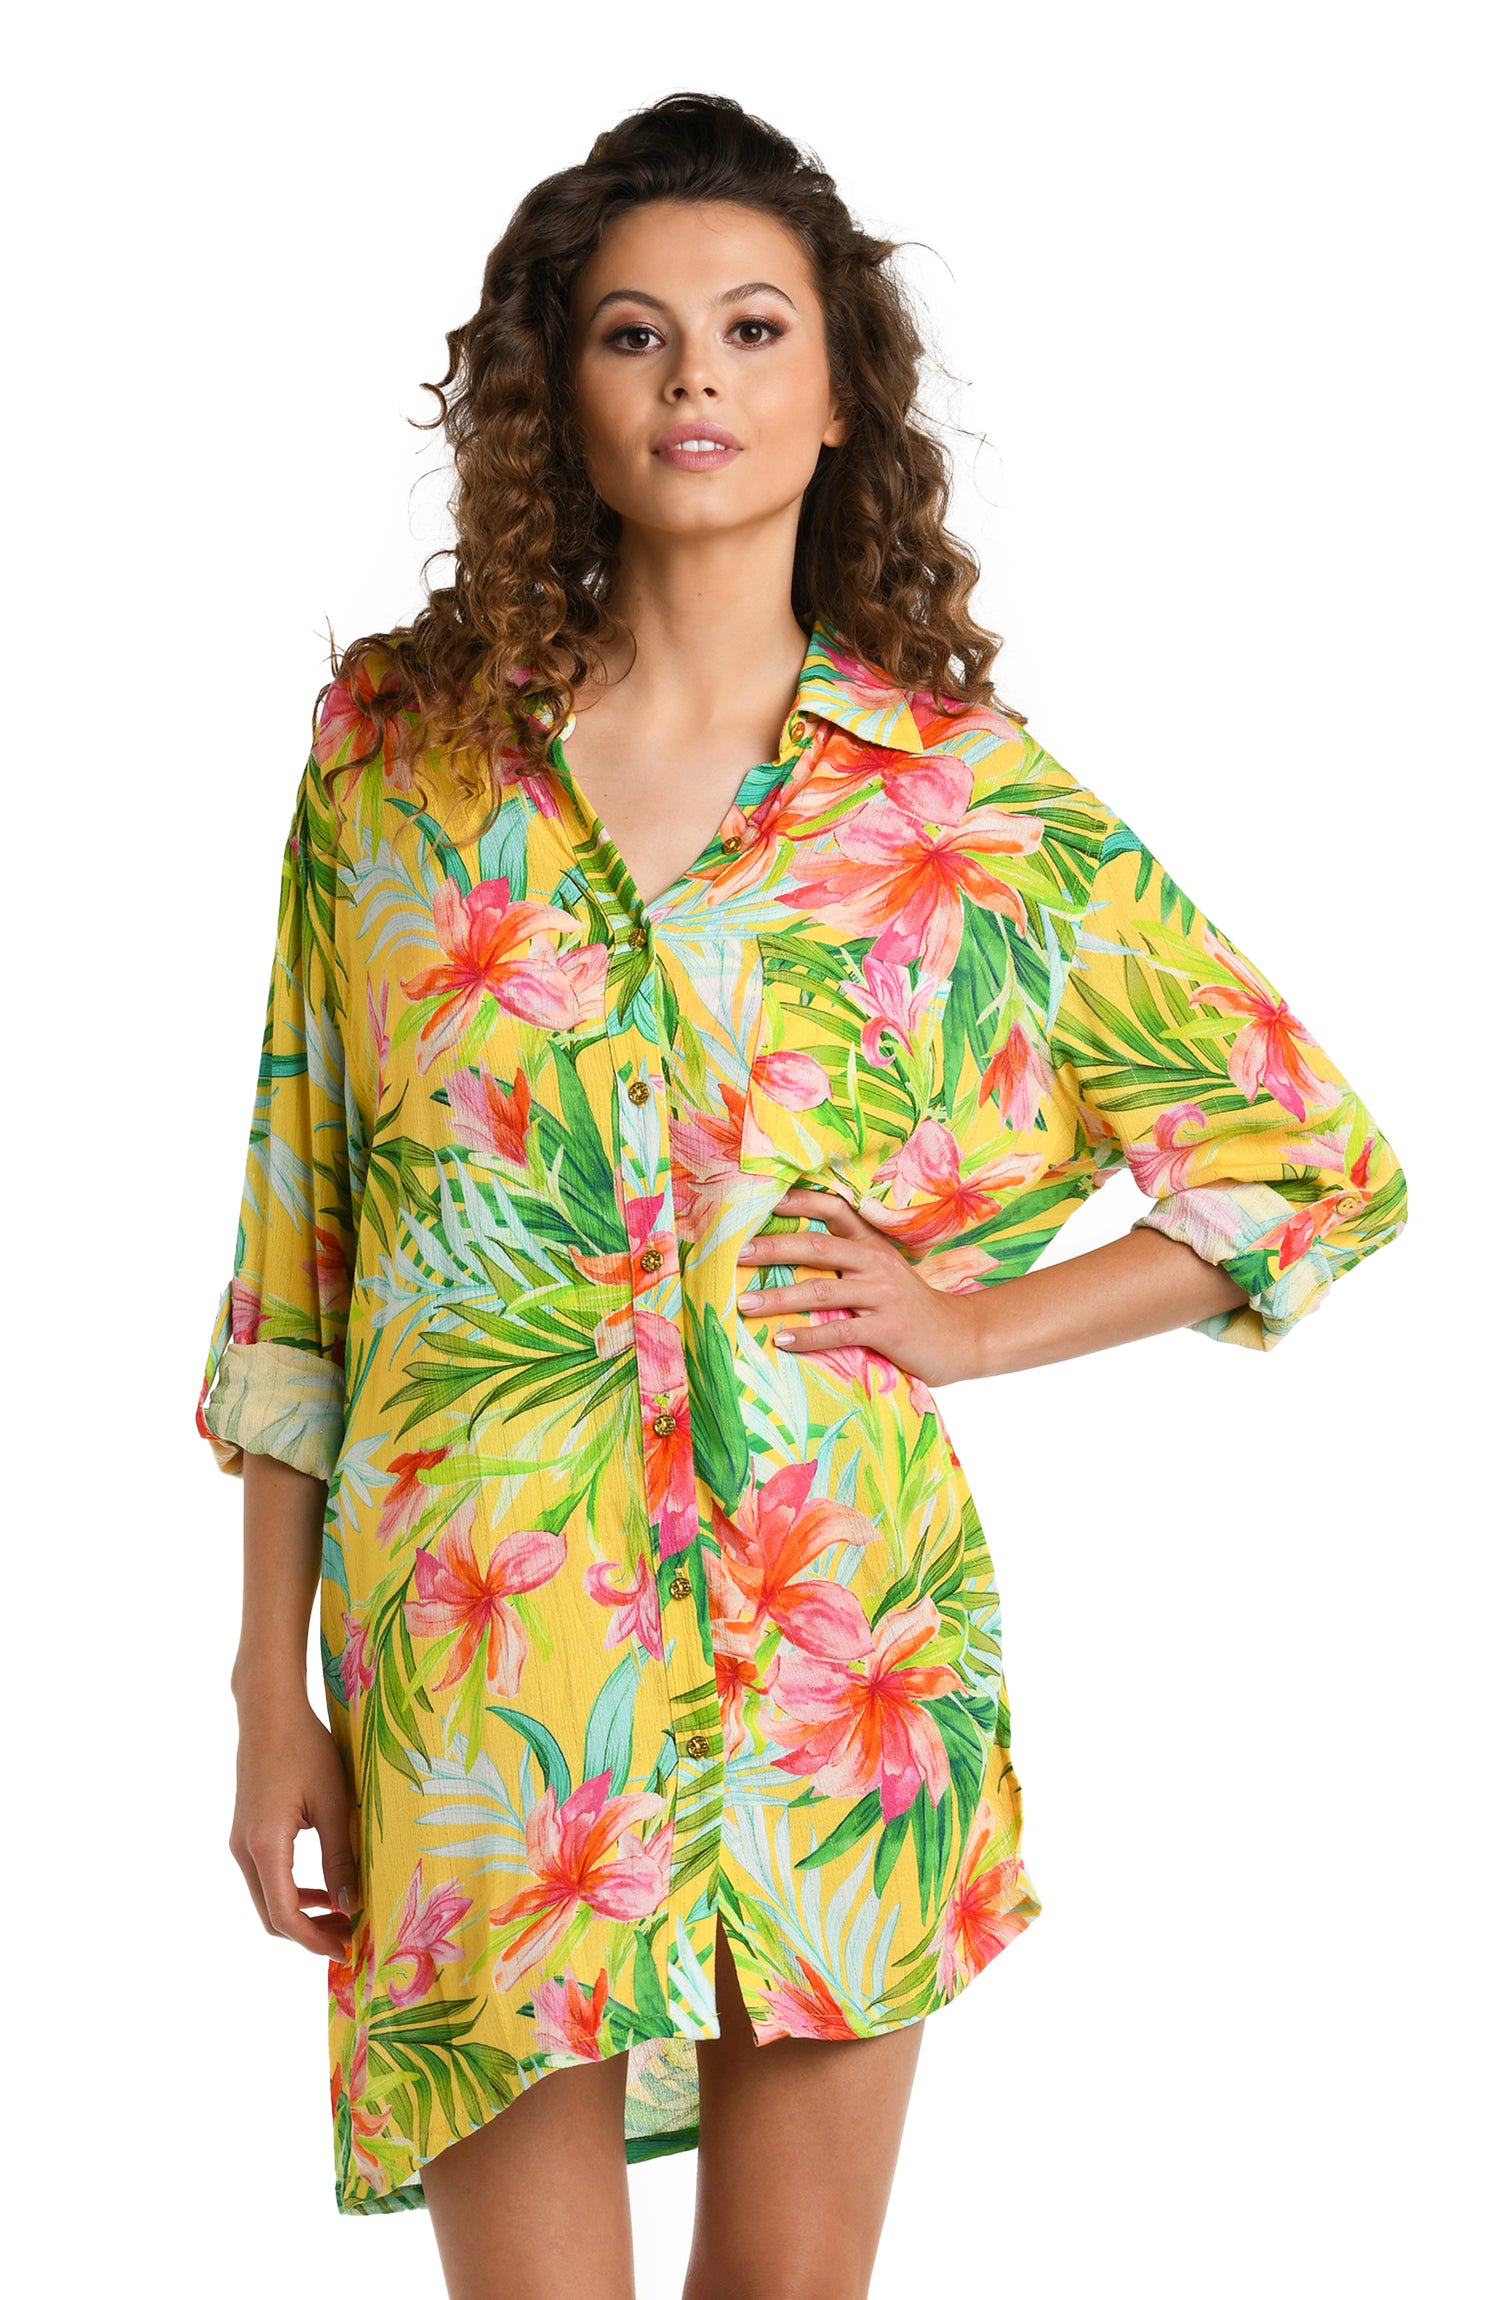 Model is wearing a bright yellow, pink, and green multicolored tropical printed Button Up Camp Shirt